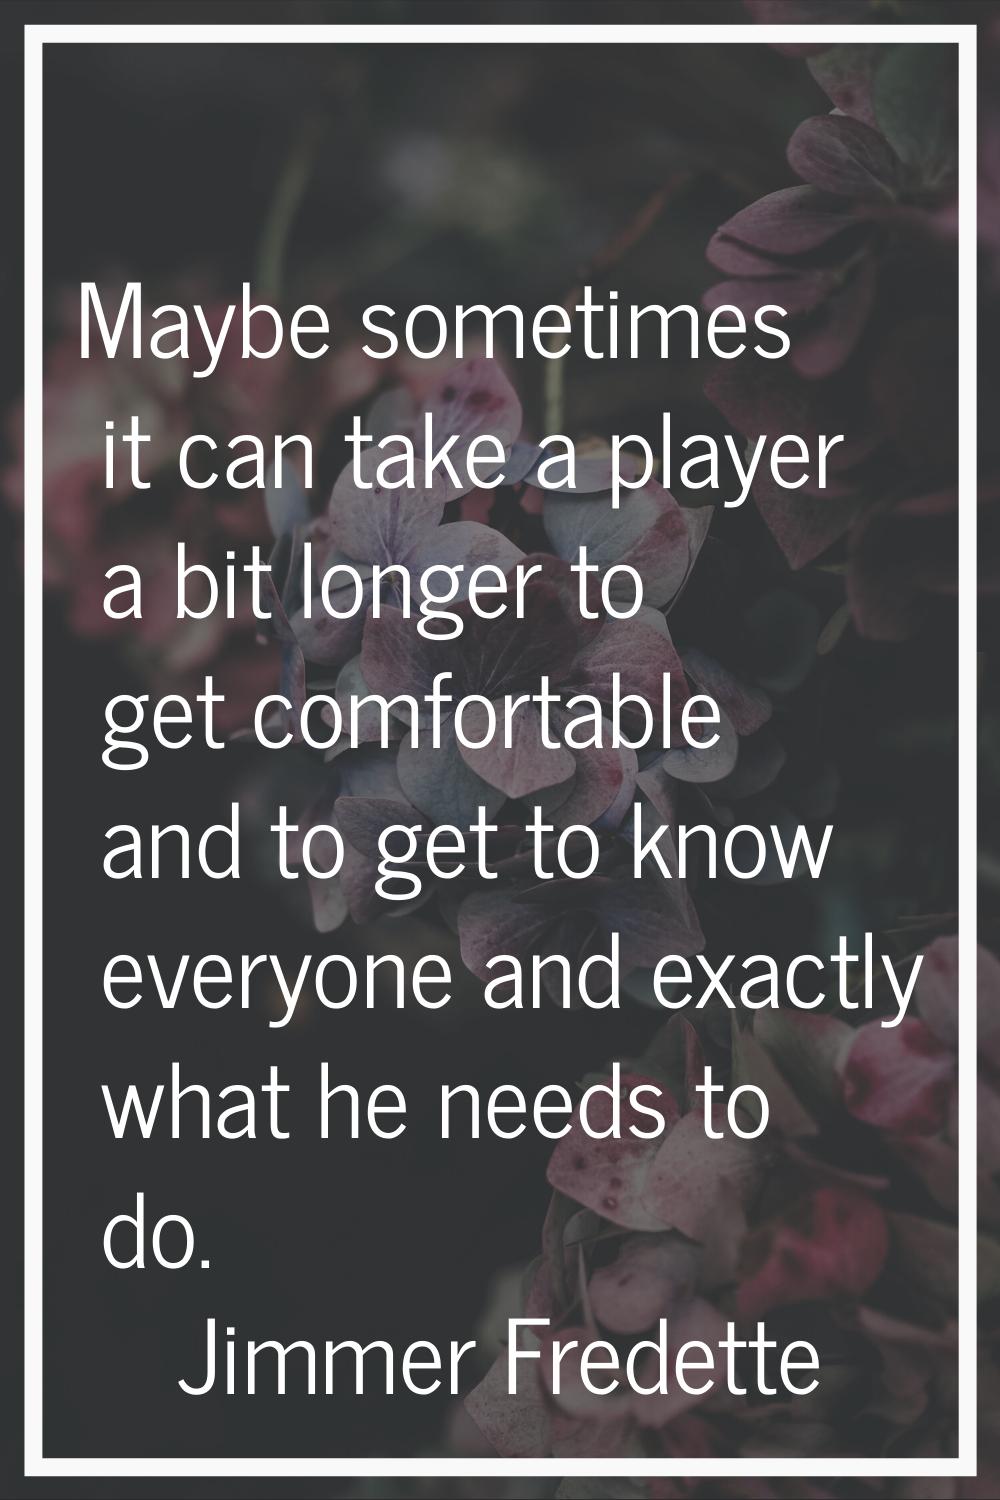 Maybe sometimes it can take a player a bit longer to get comfortable and to get to know everyone an